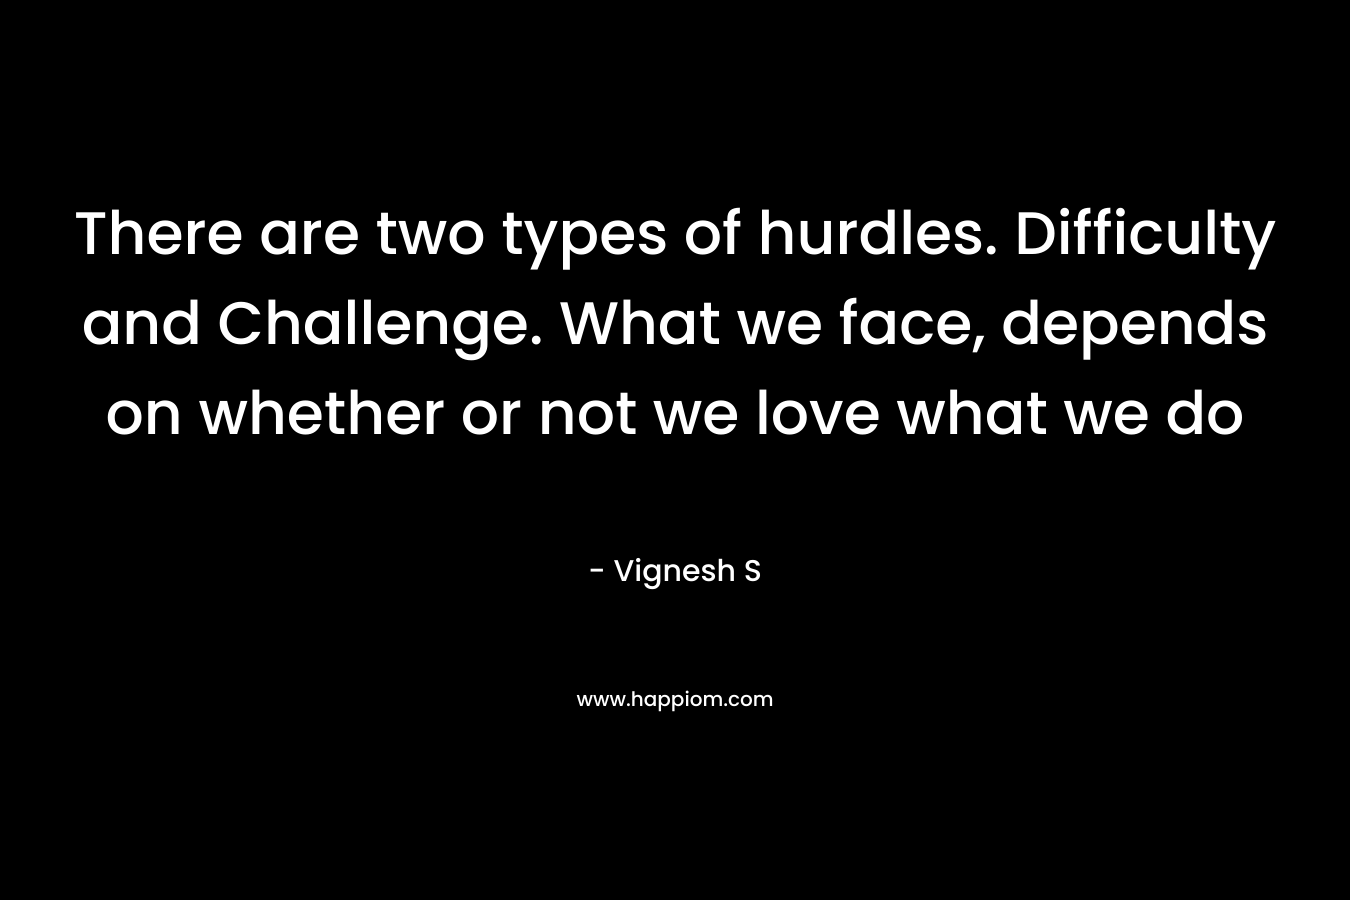 There are two types of hurdles. Difficulty and Challenge. What we face, depends on whether or not we love what we do – Vignesh S